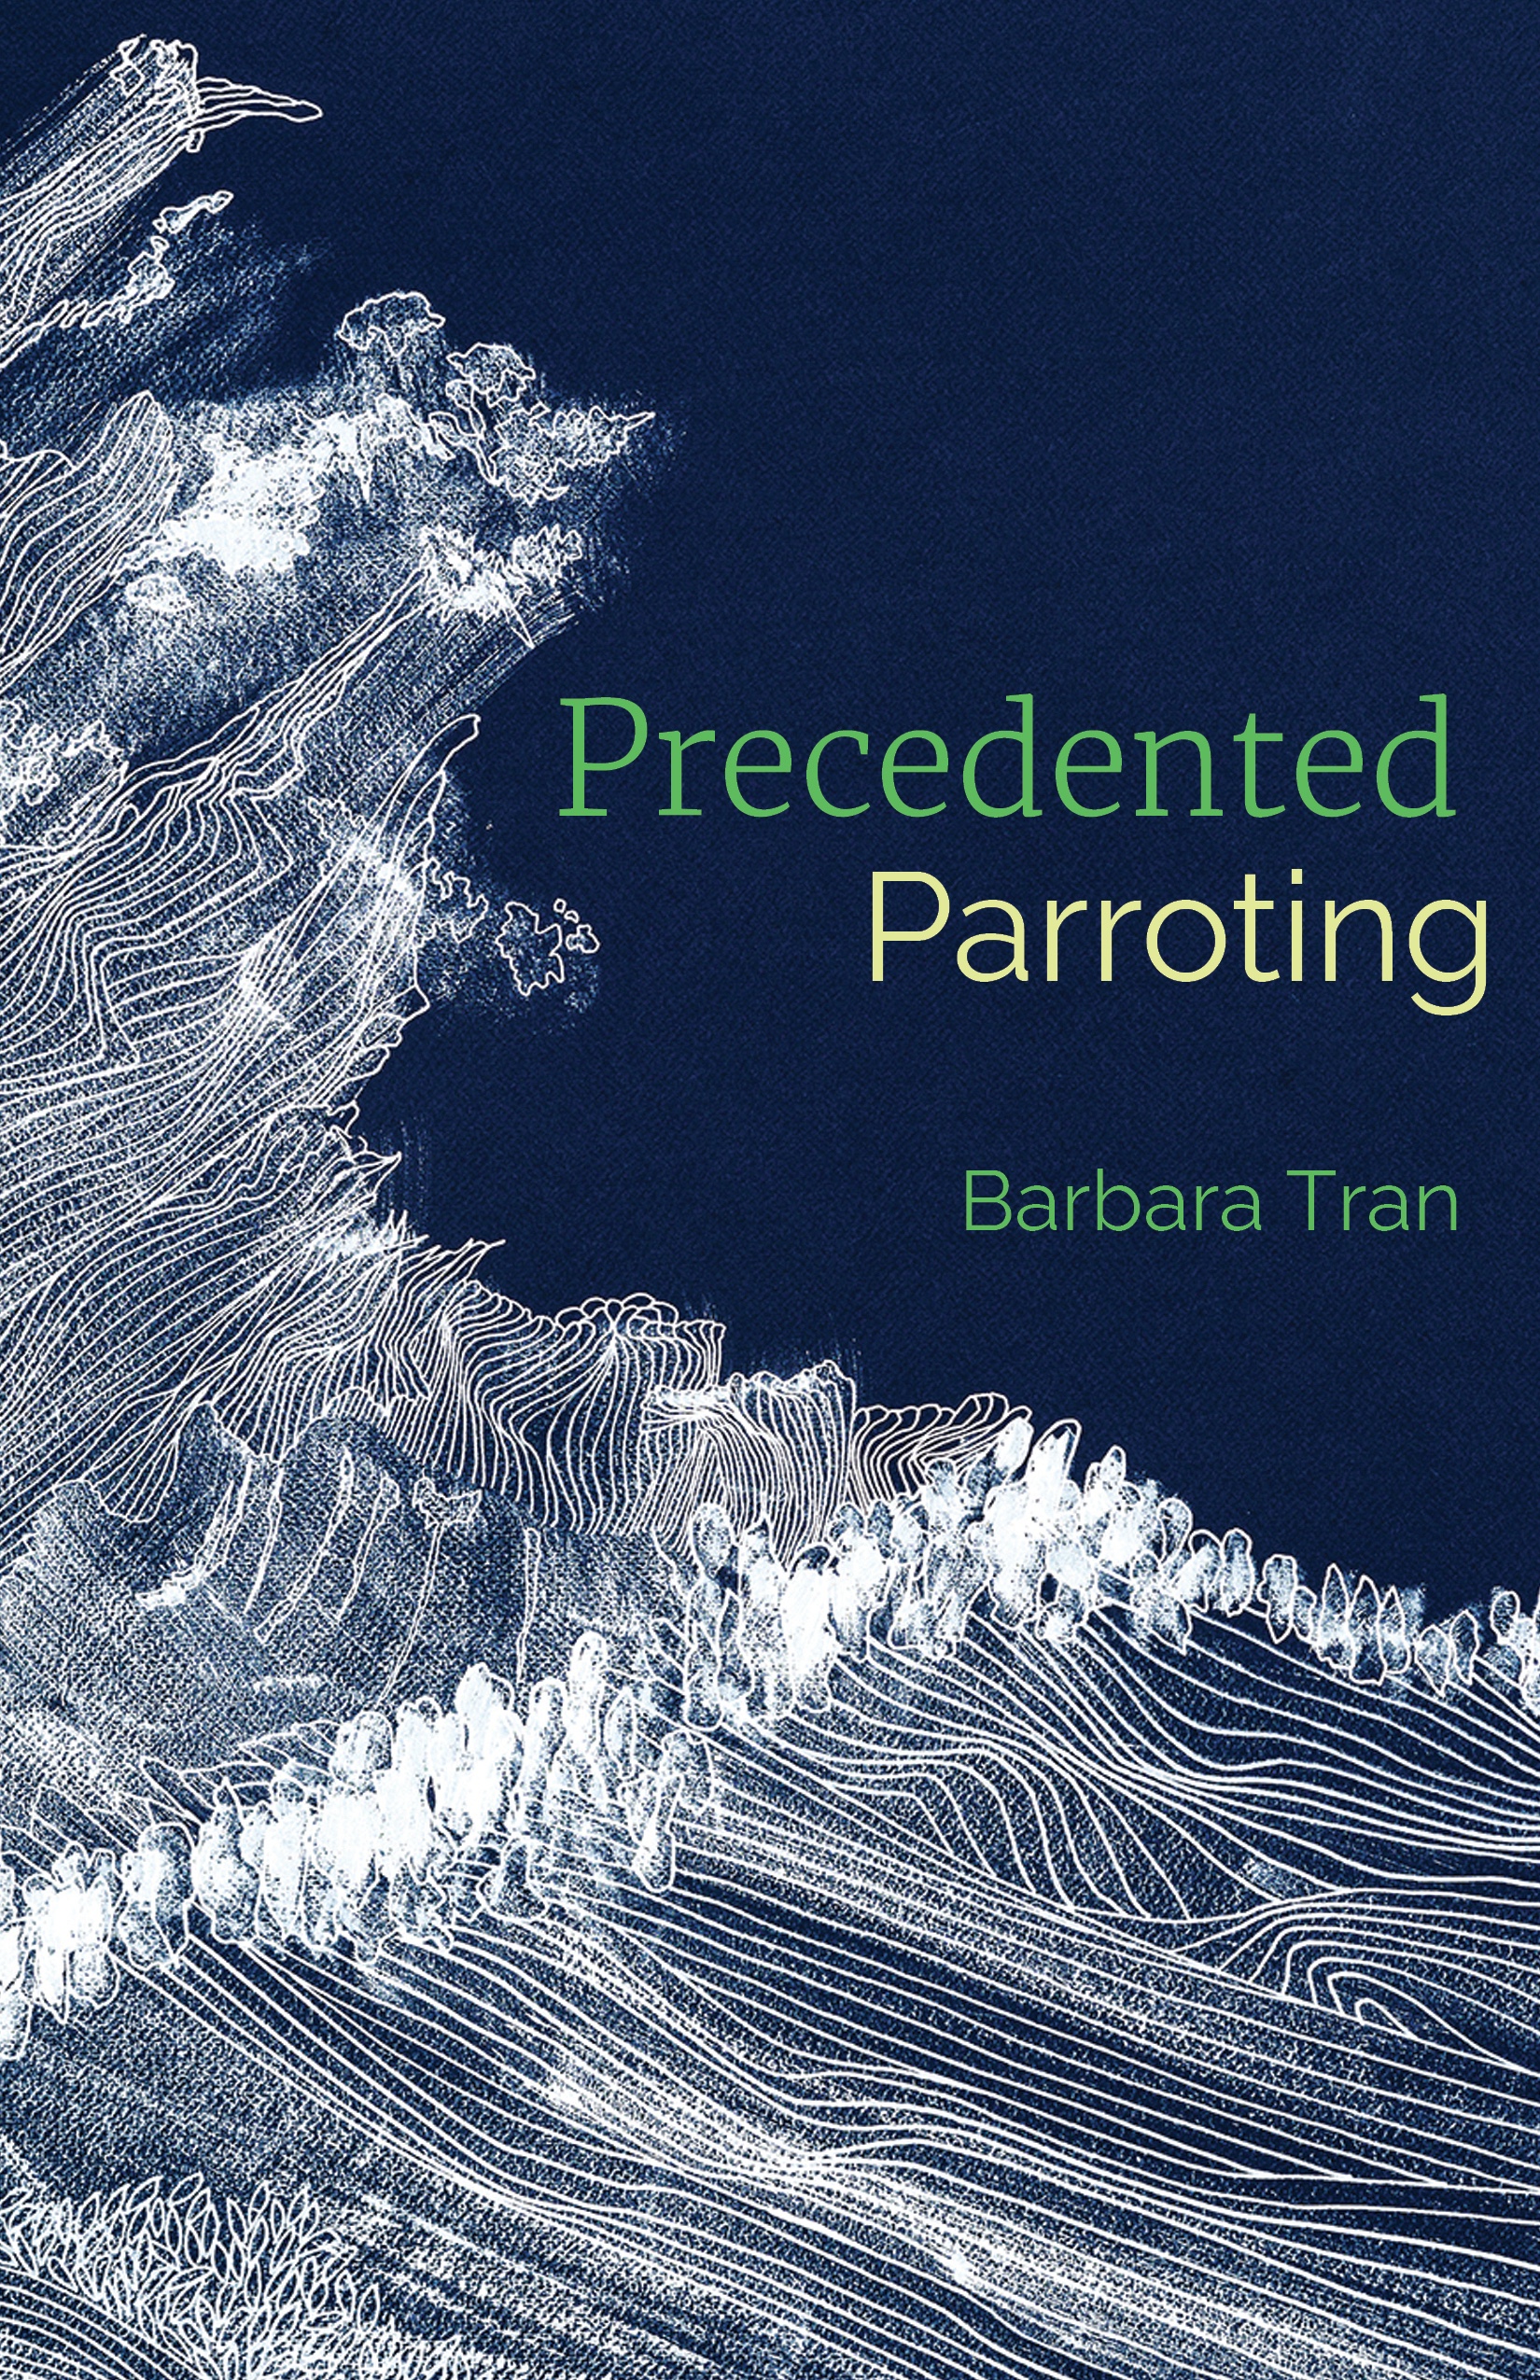 Precedented Parroting book cover in dark blue with white wave image by Yen Ha